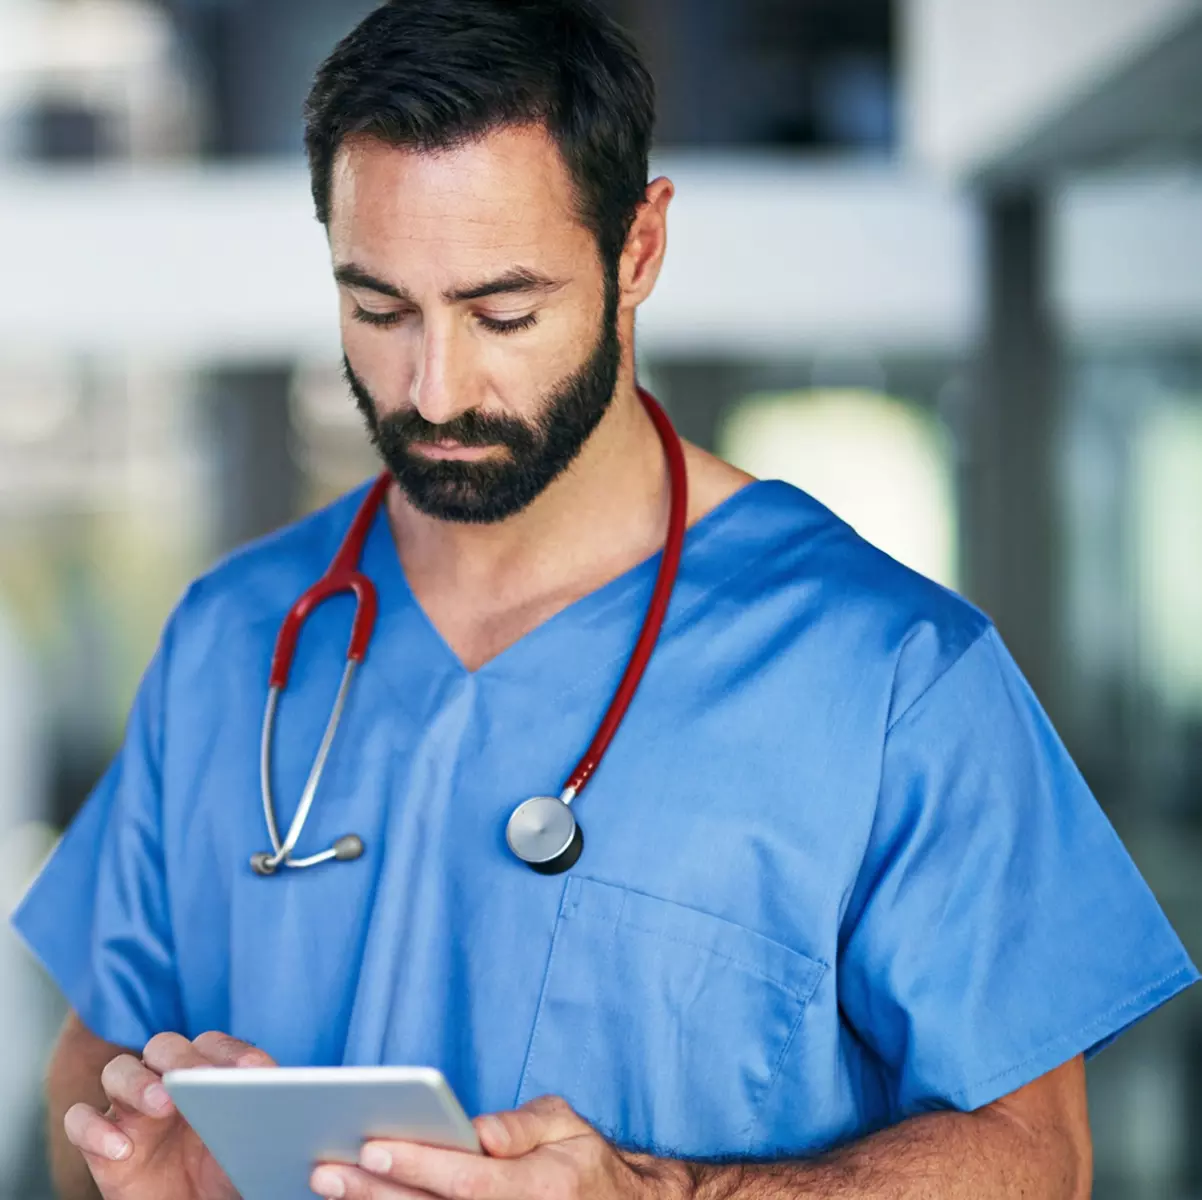 Changing the Perception of Healthcare Analytics and Productivity